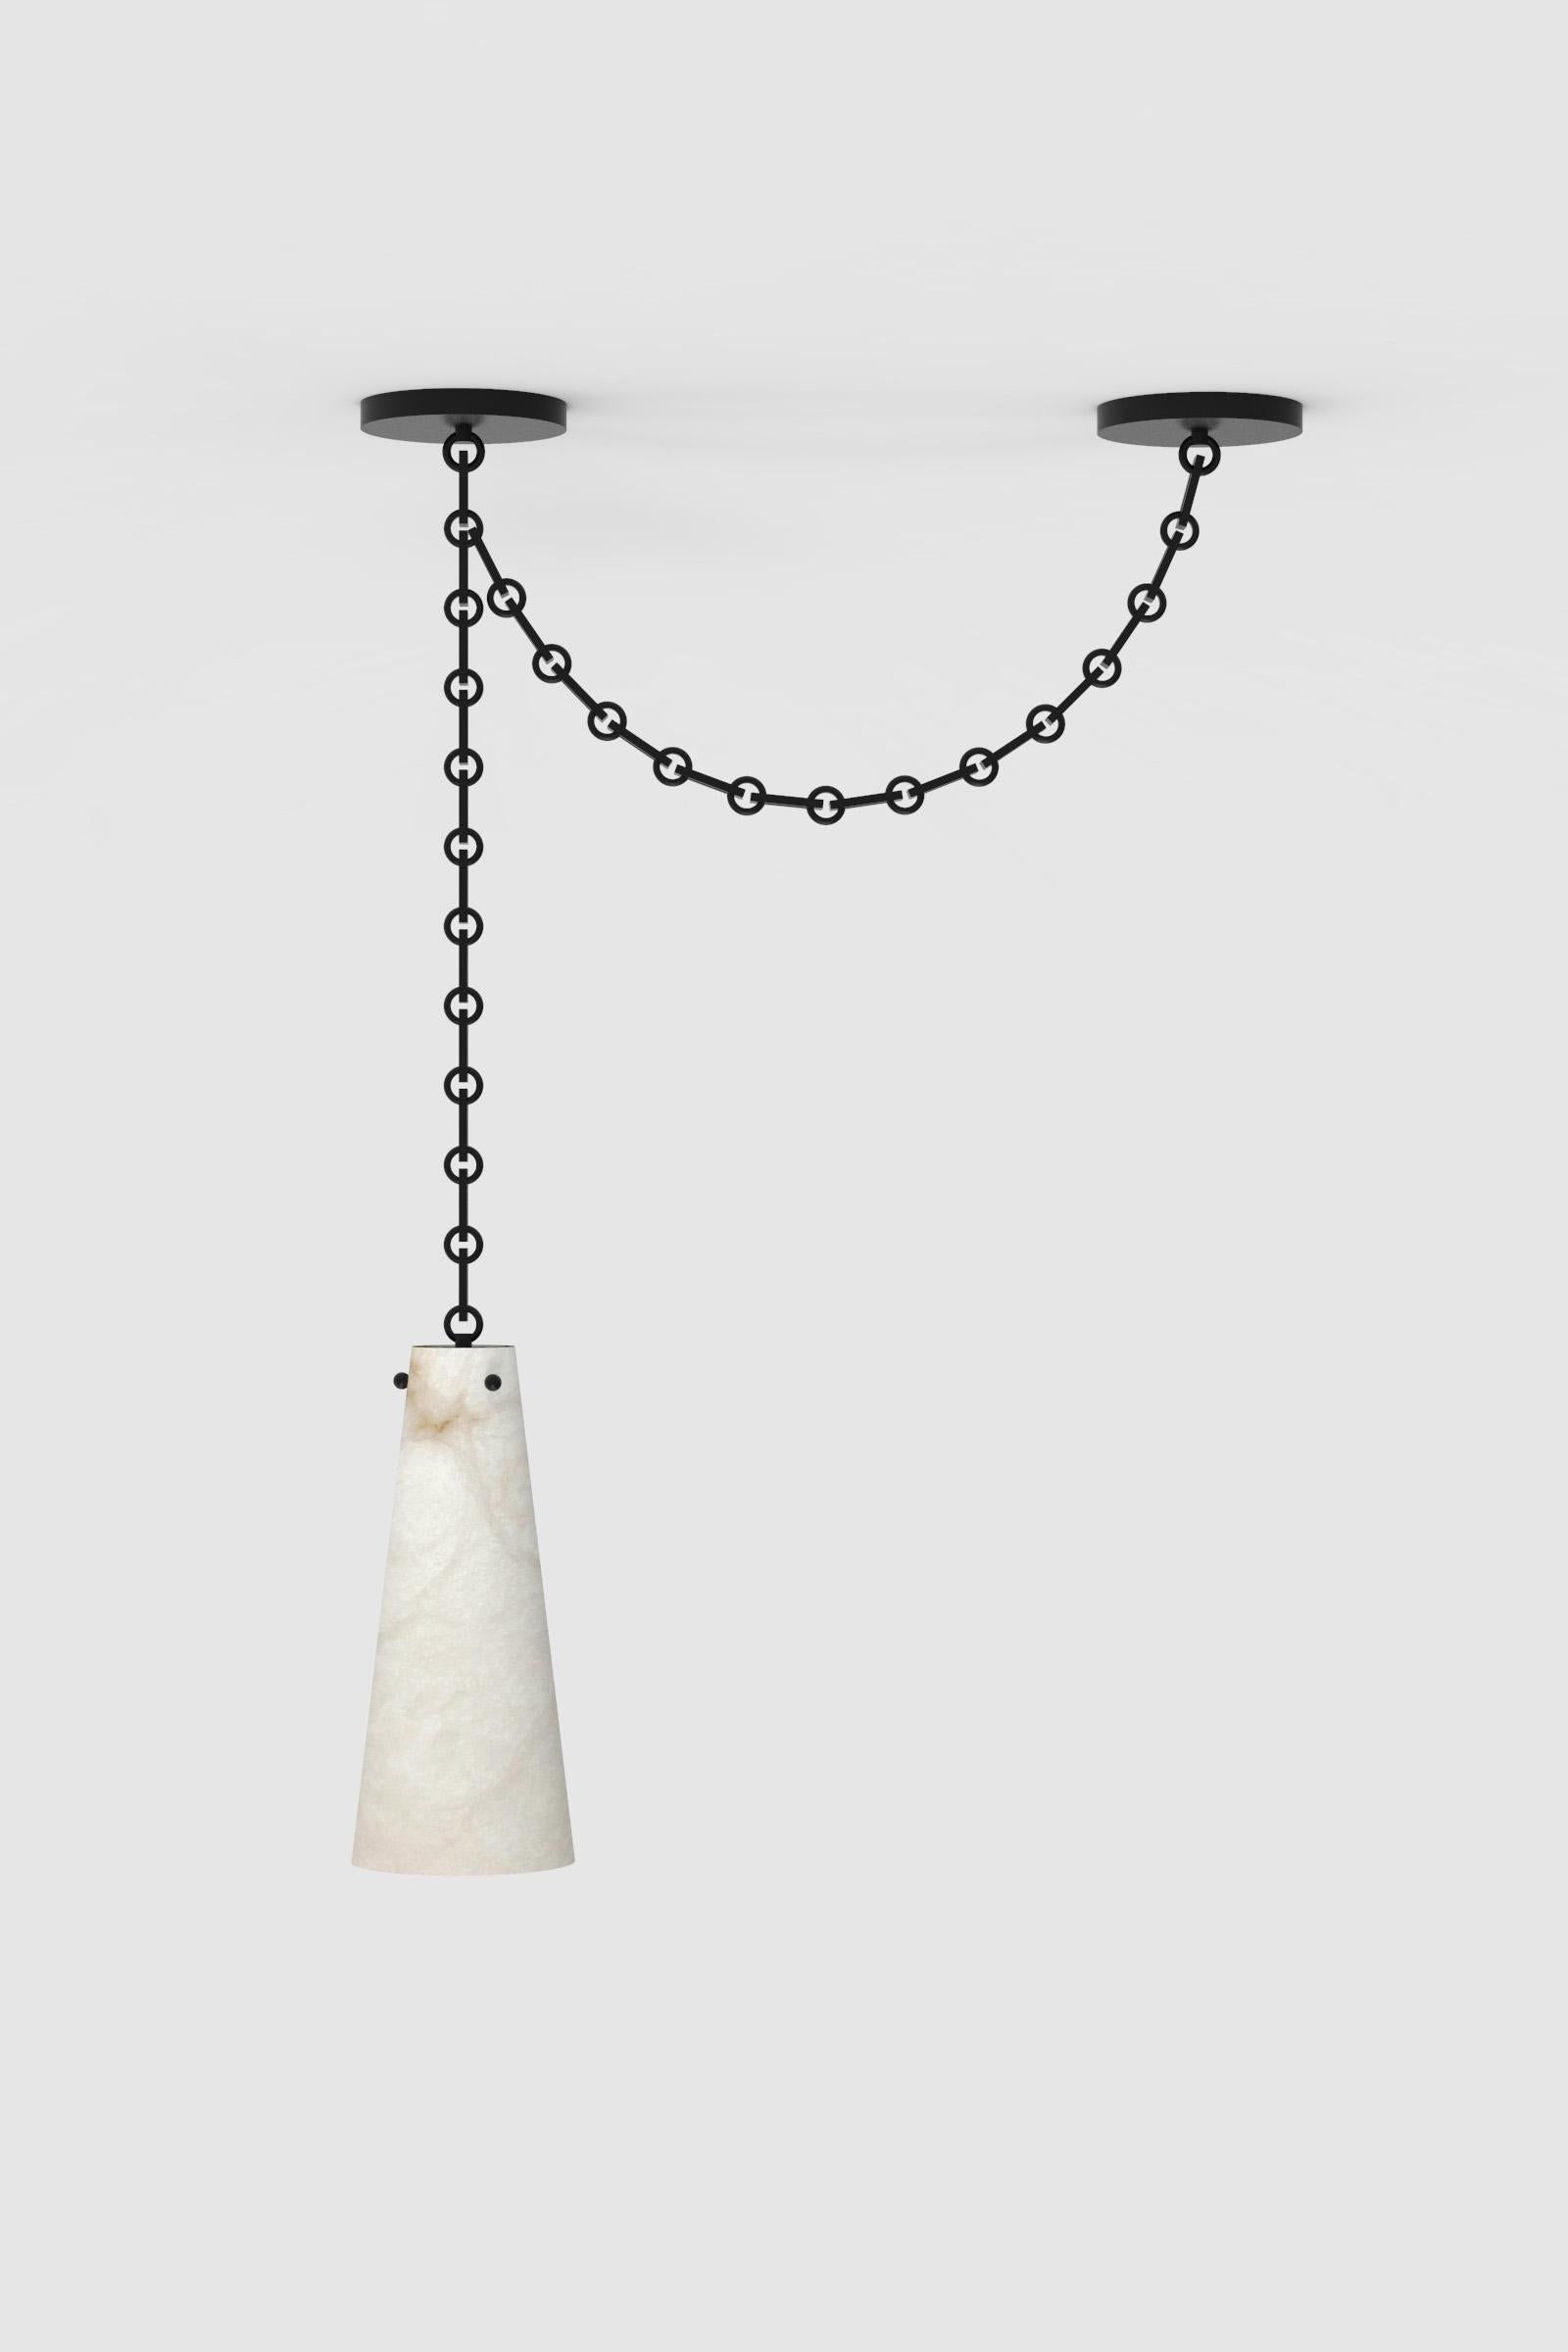 Post-Modern Contemporary Lucca Pendant 202A-1S in Alabaster by Orphan Work, 2021 For Sale